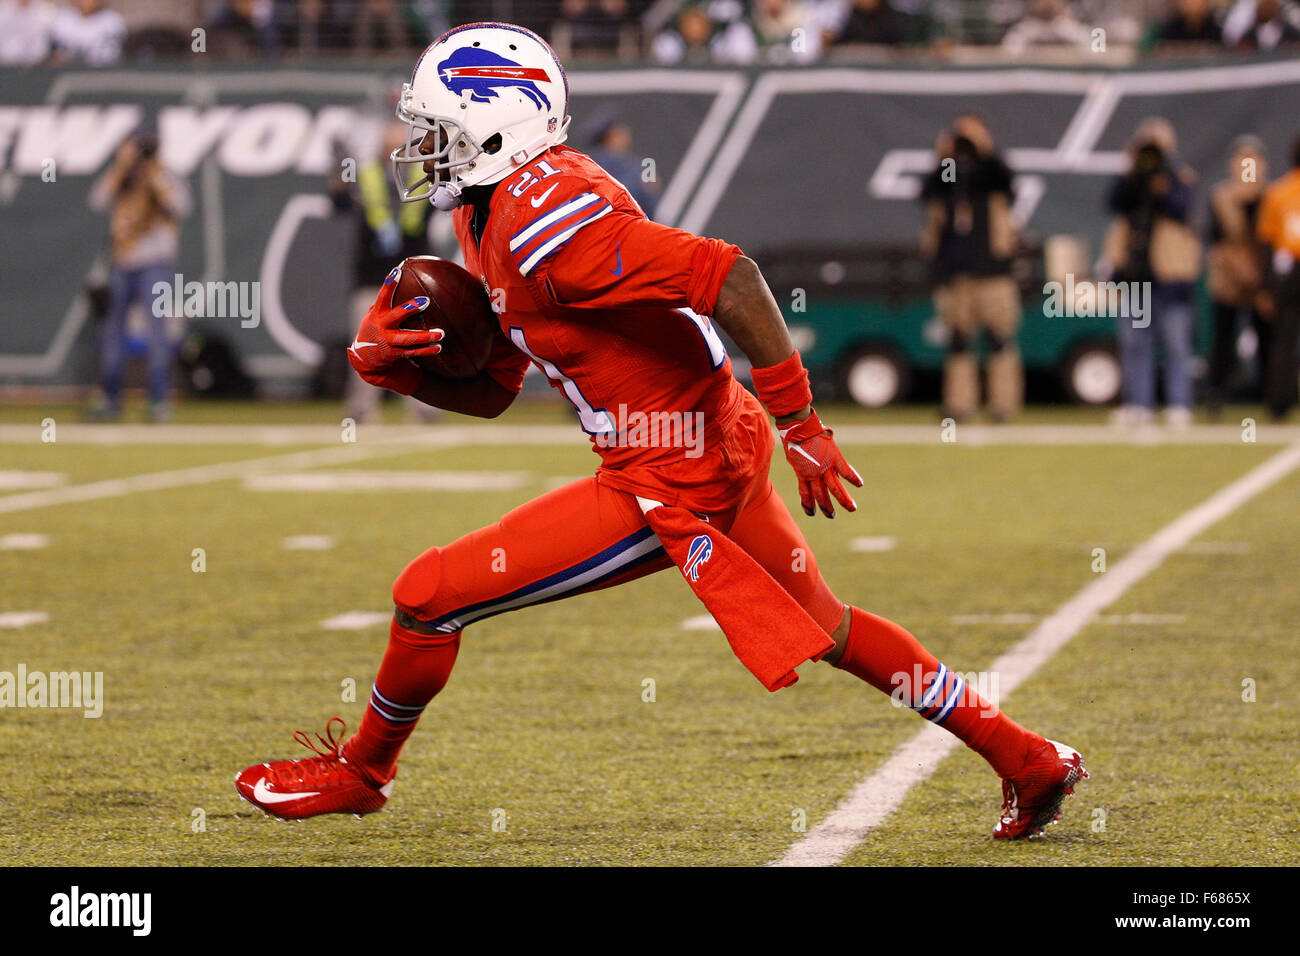 East Rutherford, New Jersey, USA. 12th Nov, 2015. Buffalo Bills cornerback Leodis McKelvin (21) returns the punt during the NFL game between the Buffalo Bills and the New York Jets at MetLife Stadium in East Rutherford, New Jersey. The Buffalo Bills won 22-17. Christopher Szagola/CSM/Alamy Live News Stock Photo